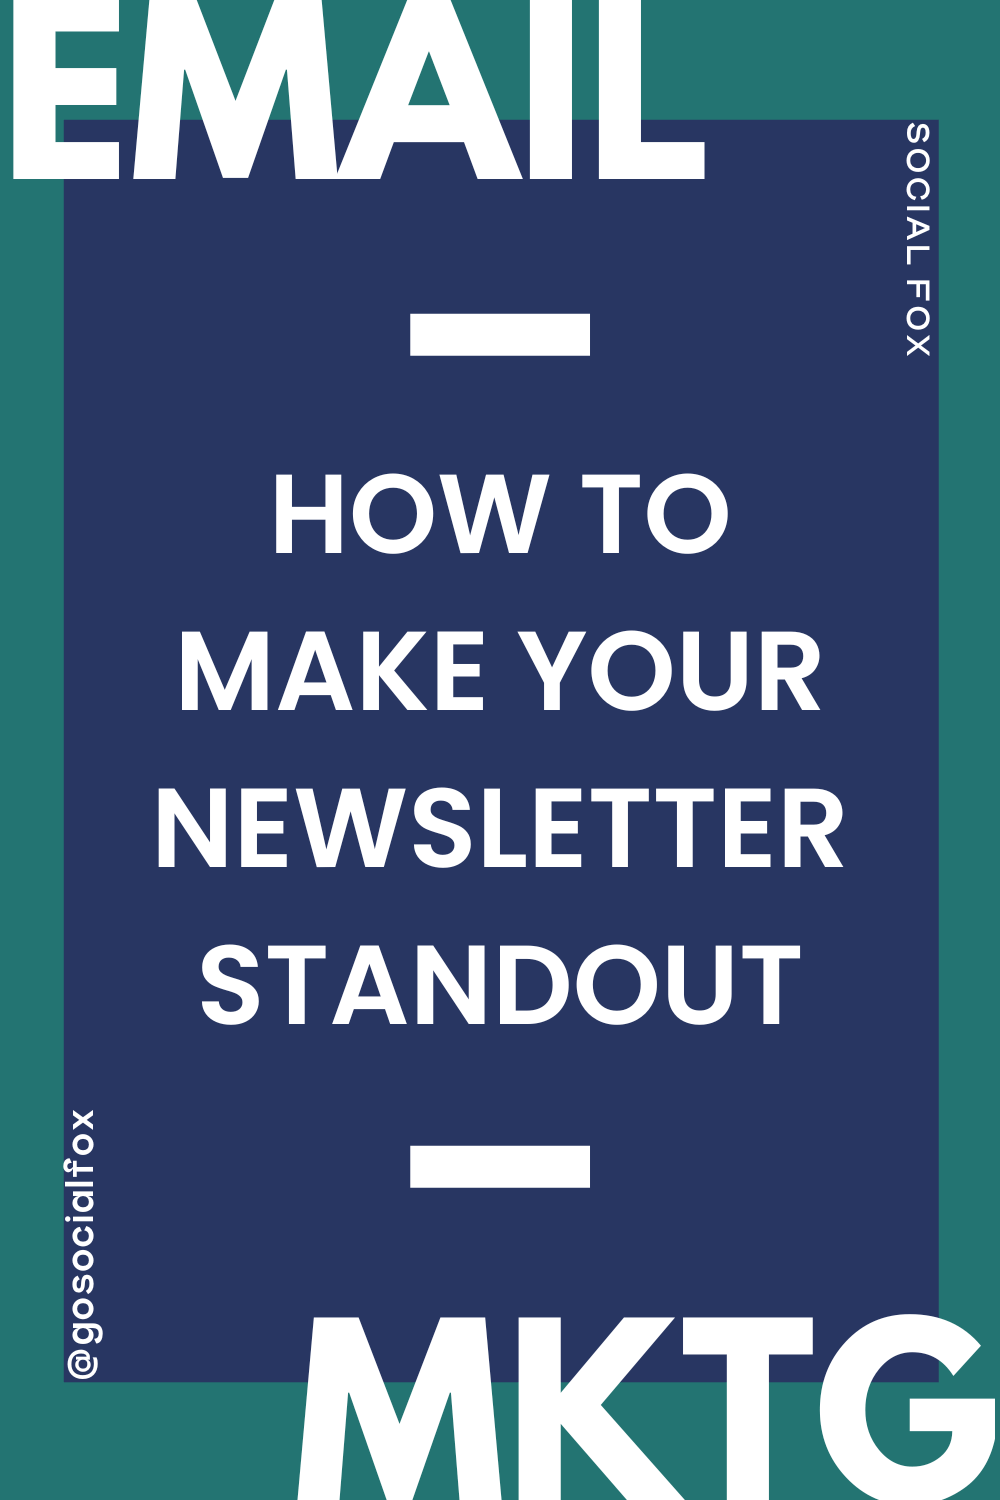 email newsletter ideas